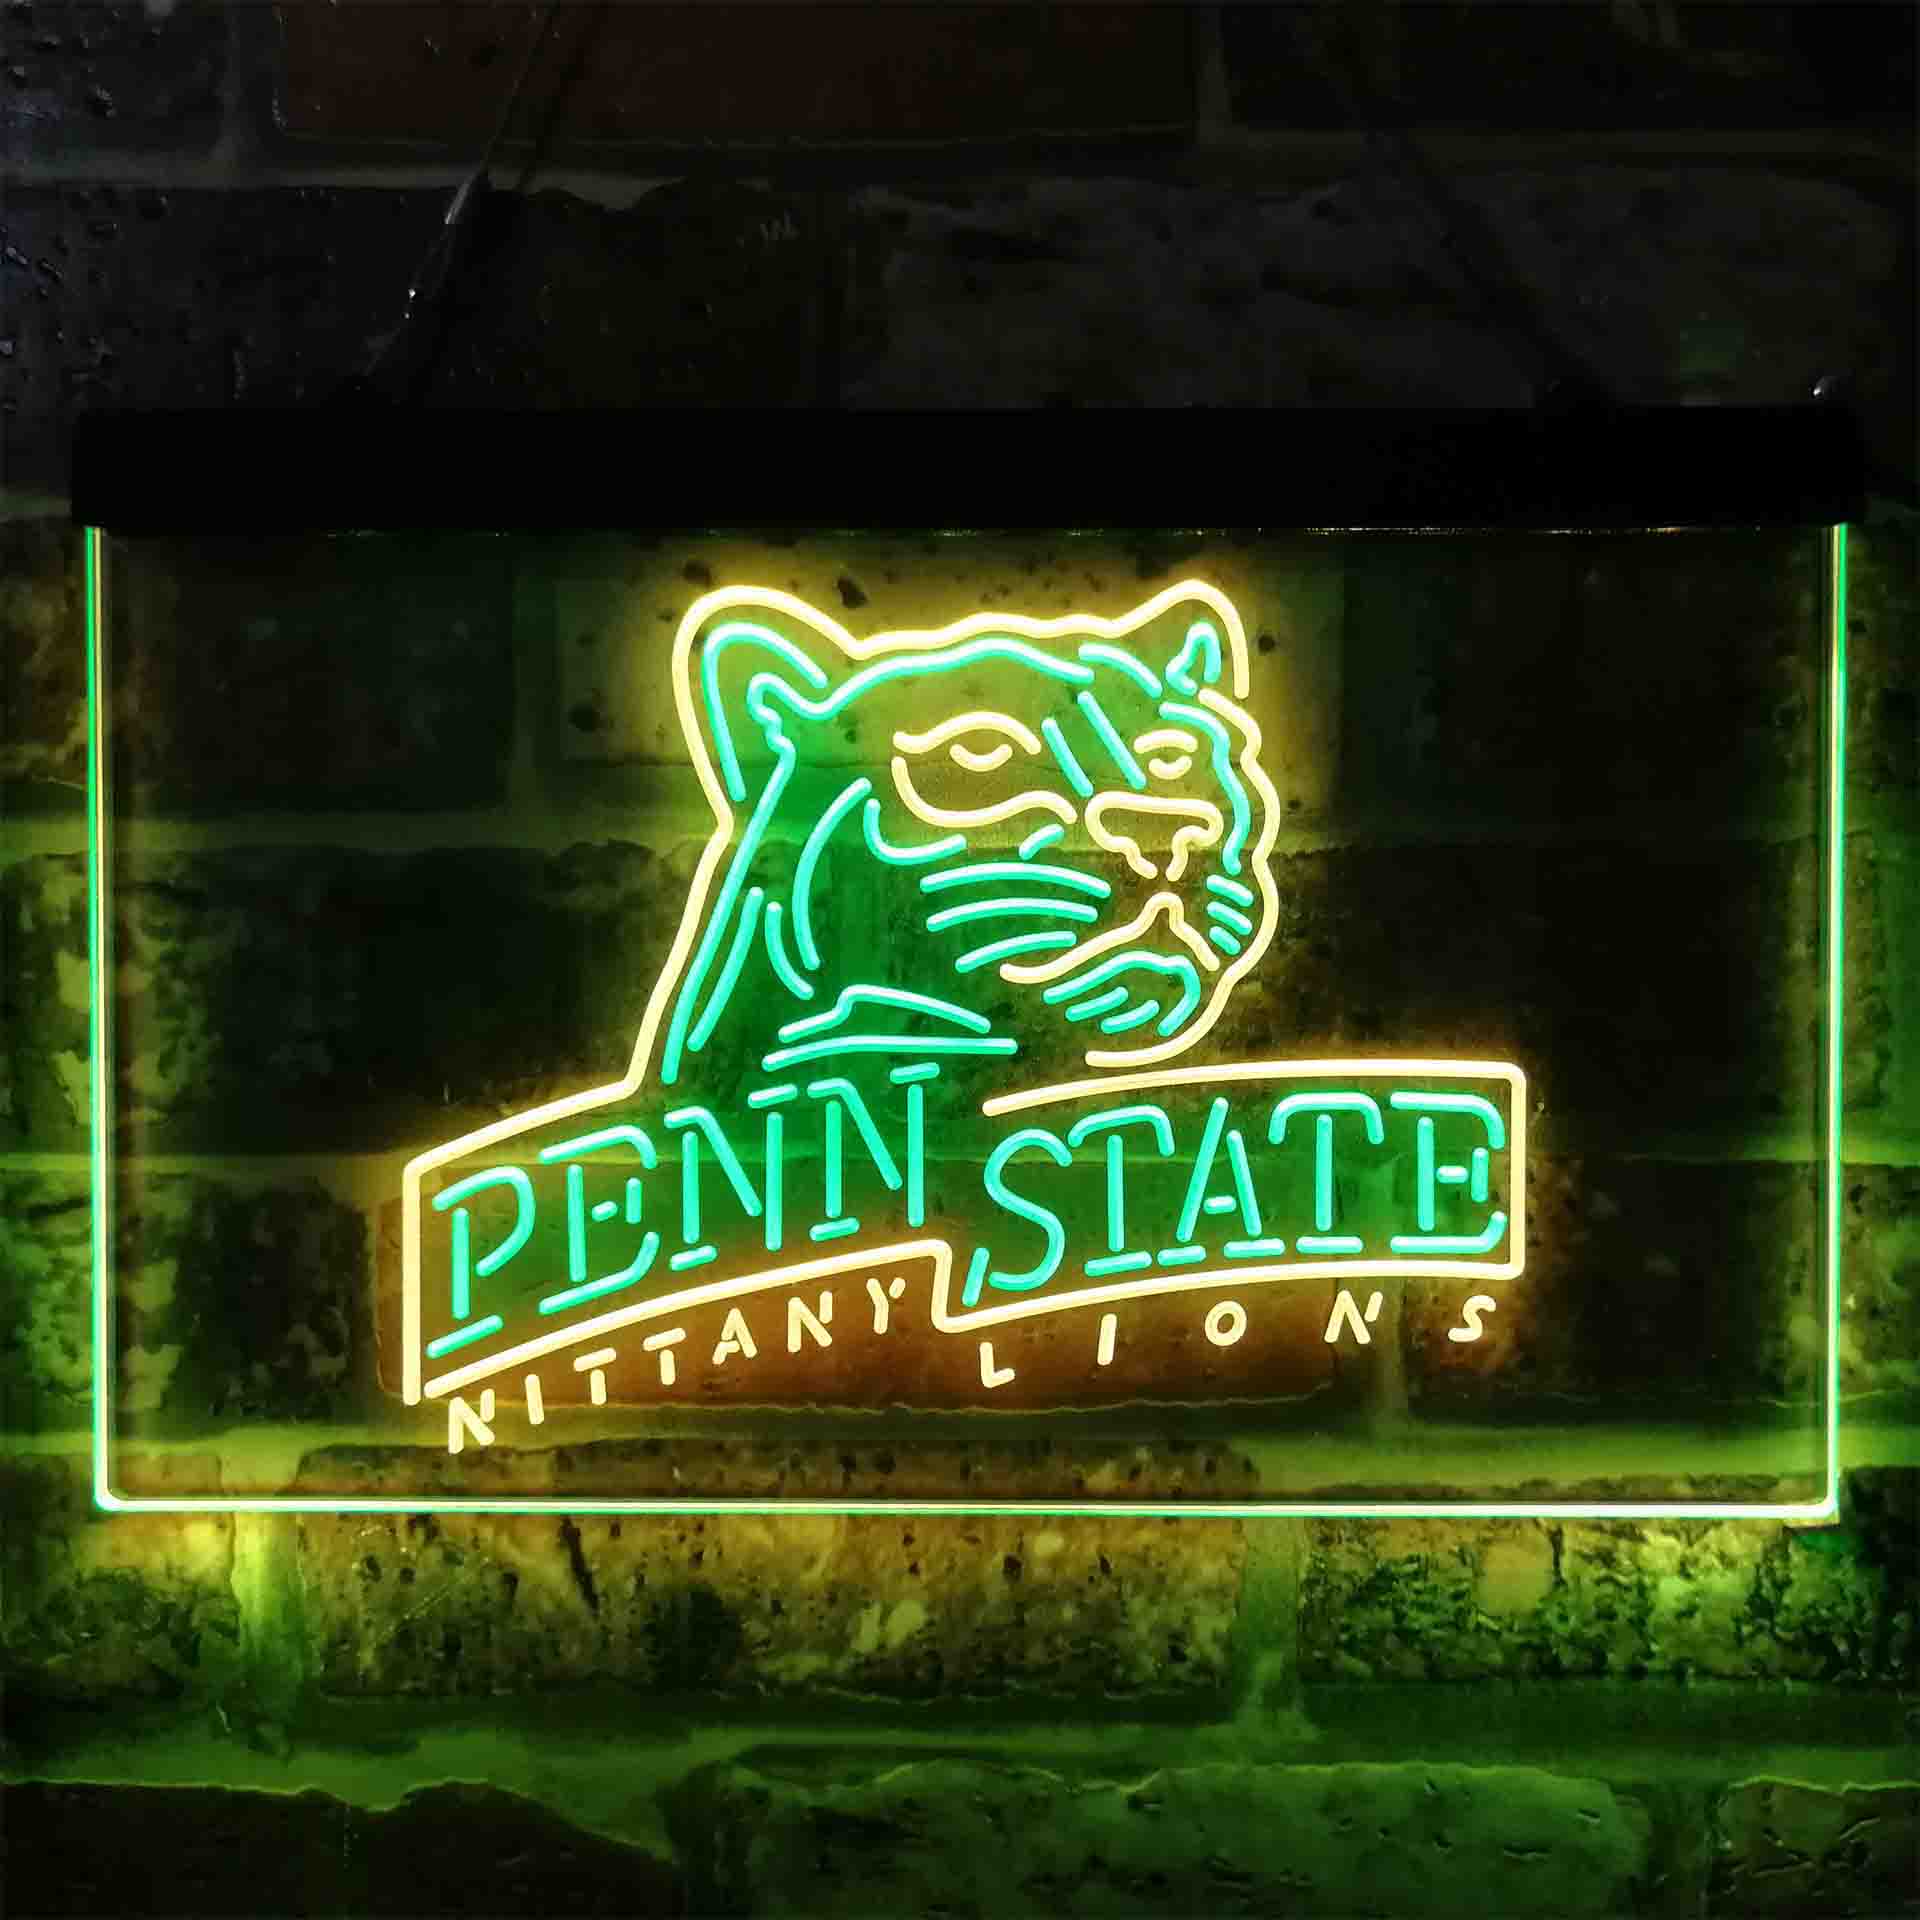 Penn State League Club Nittanys Mighty Liones LED Neon Sign